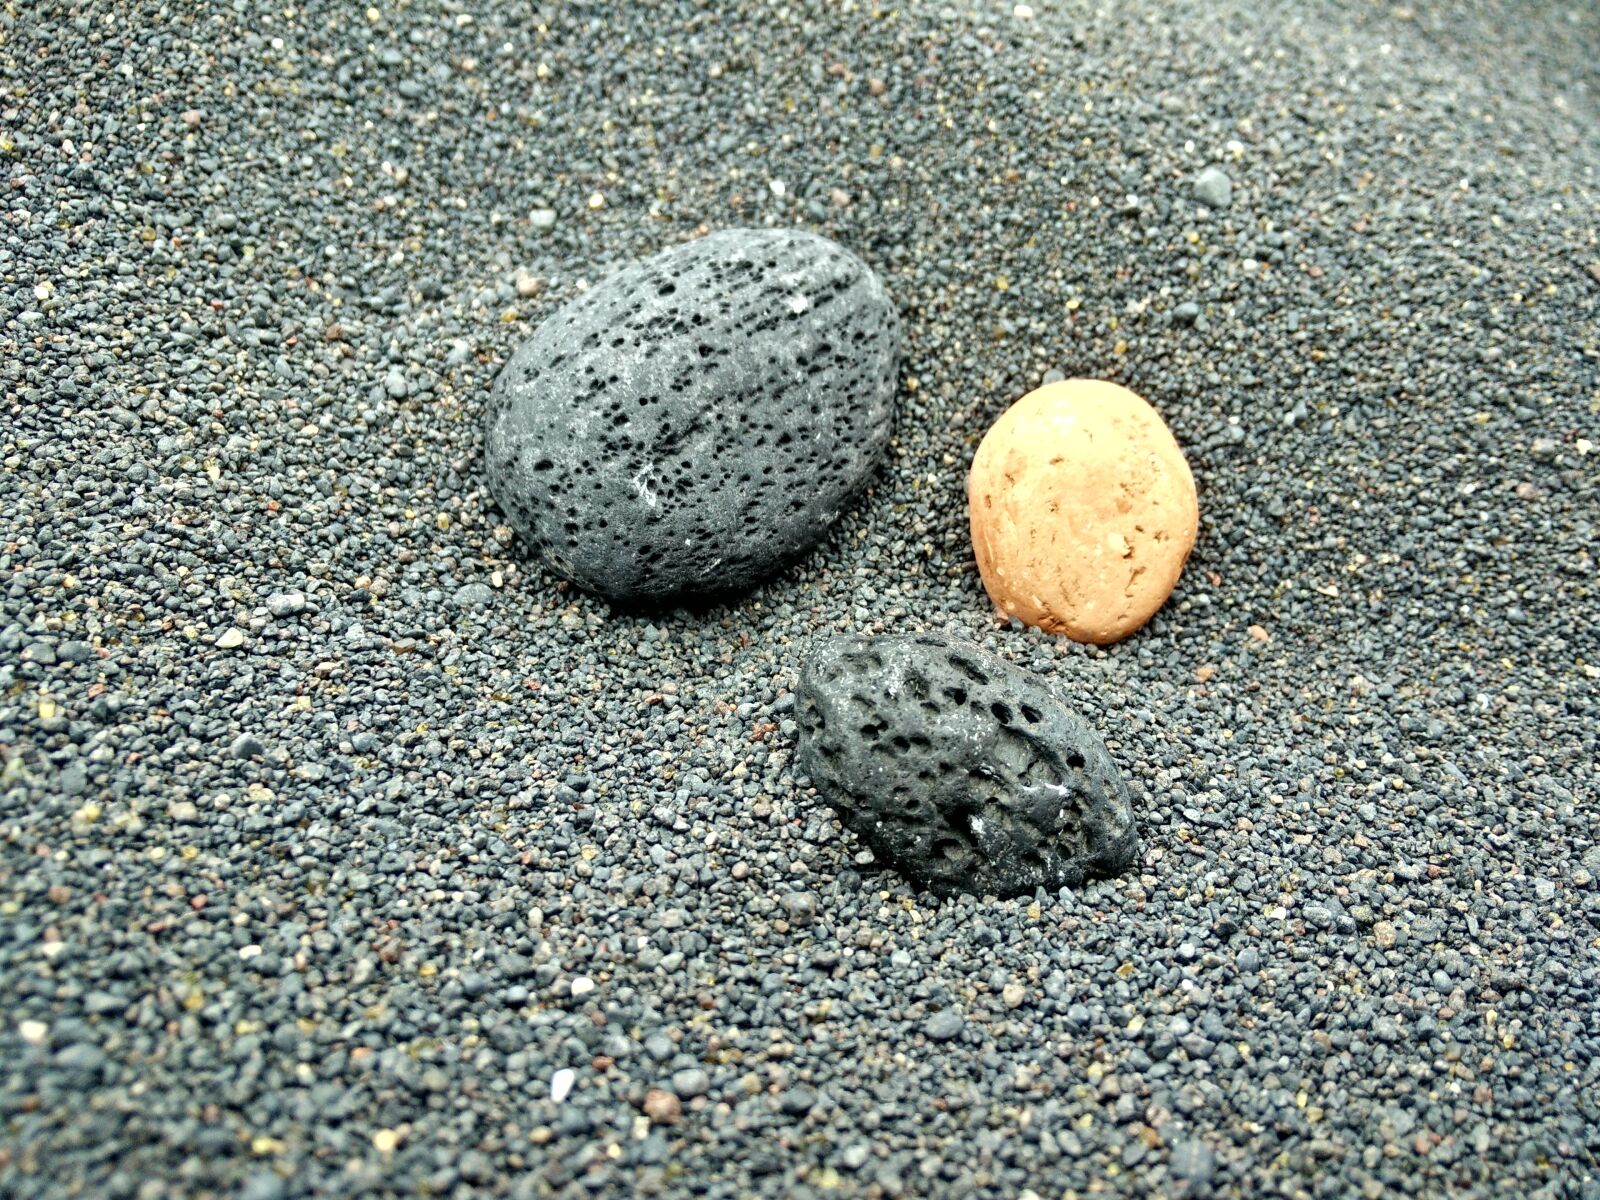 OPPO Find7 sample photo. Sand, pebble, stones photography